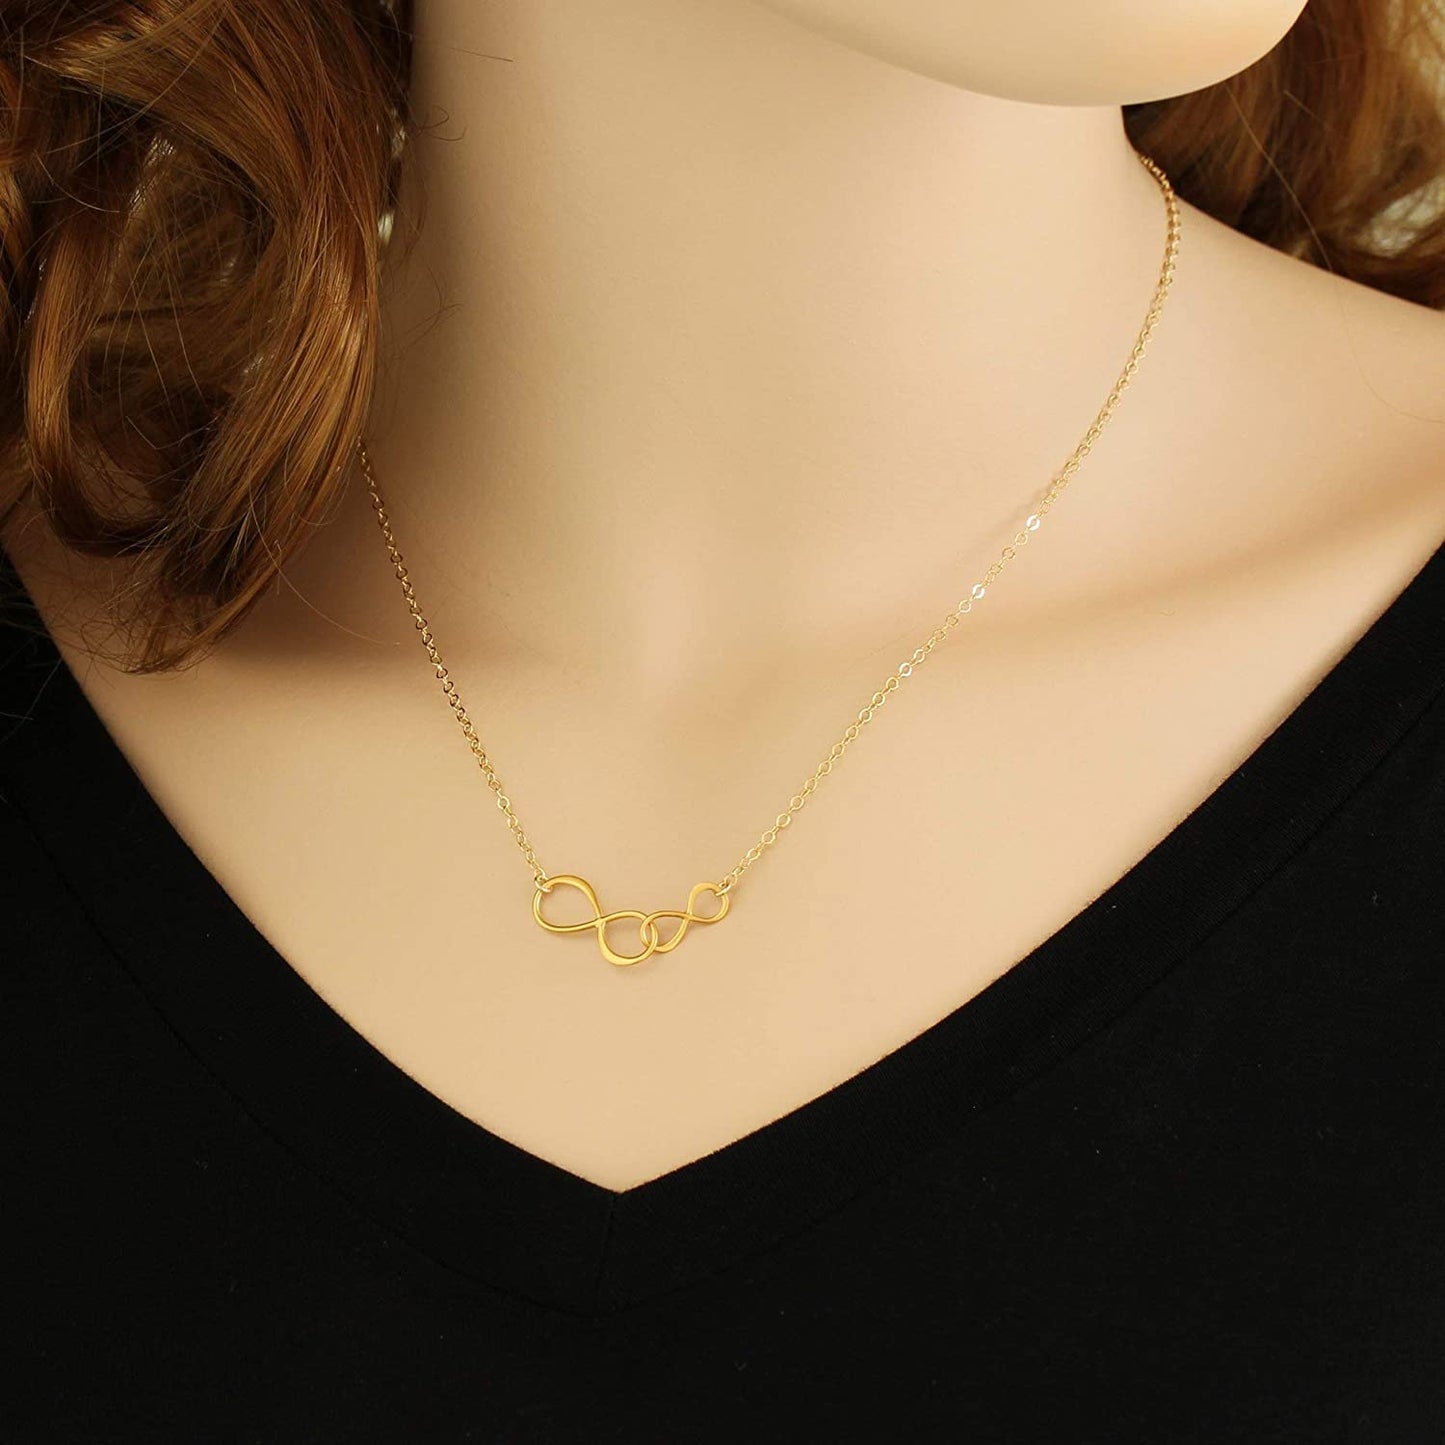 The Love Between a Father & Daughter is Forever • Double Infinity Necklace • 14k Gold • Christmas Birthday Wedding Gift for Her